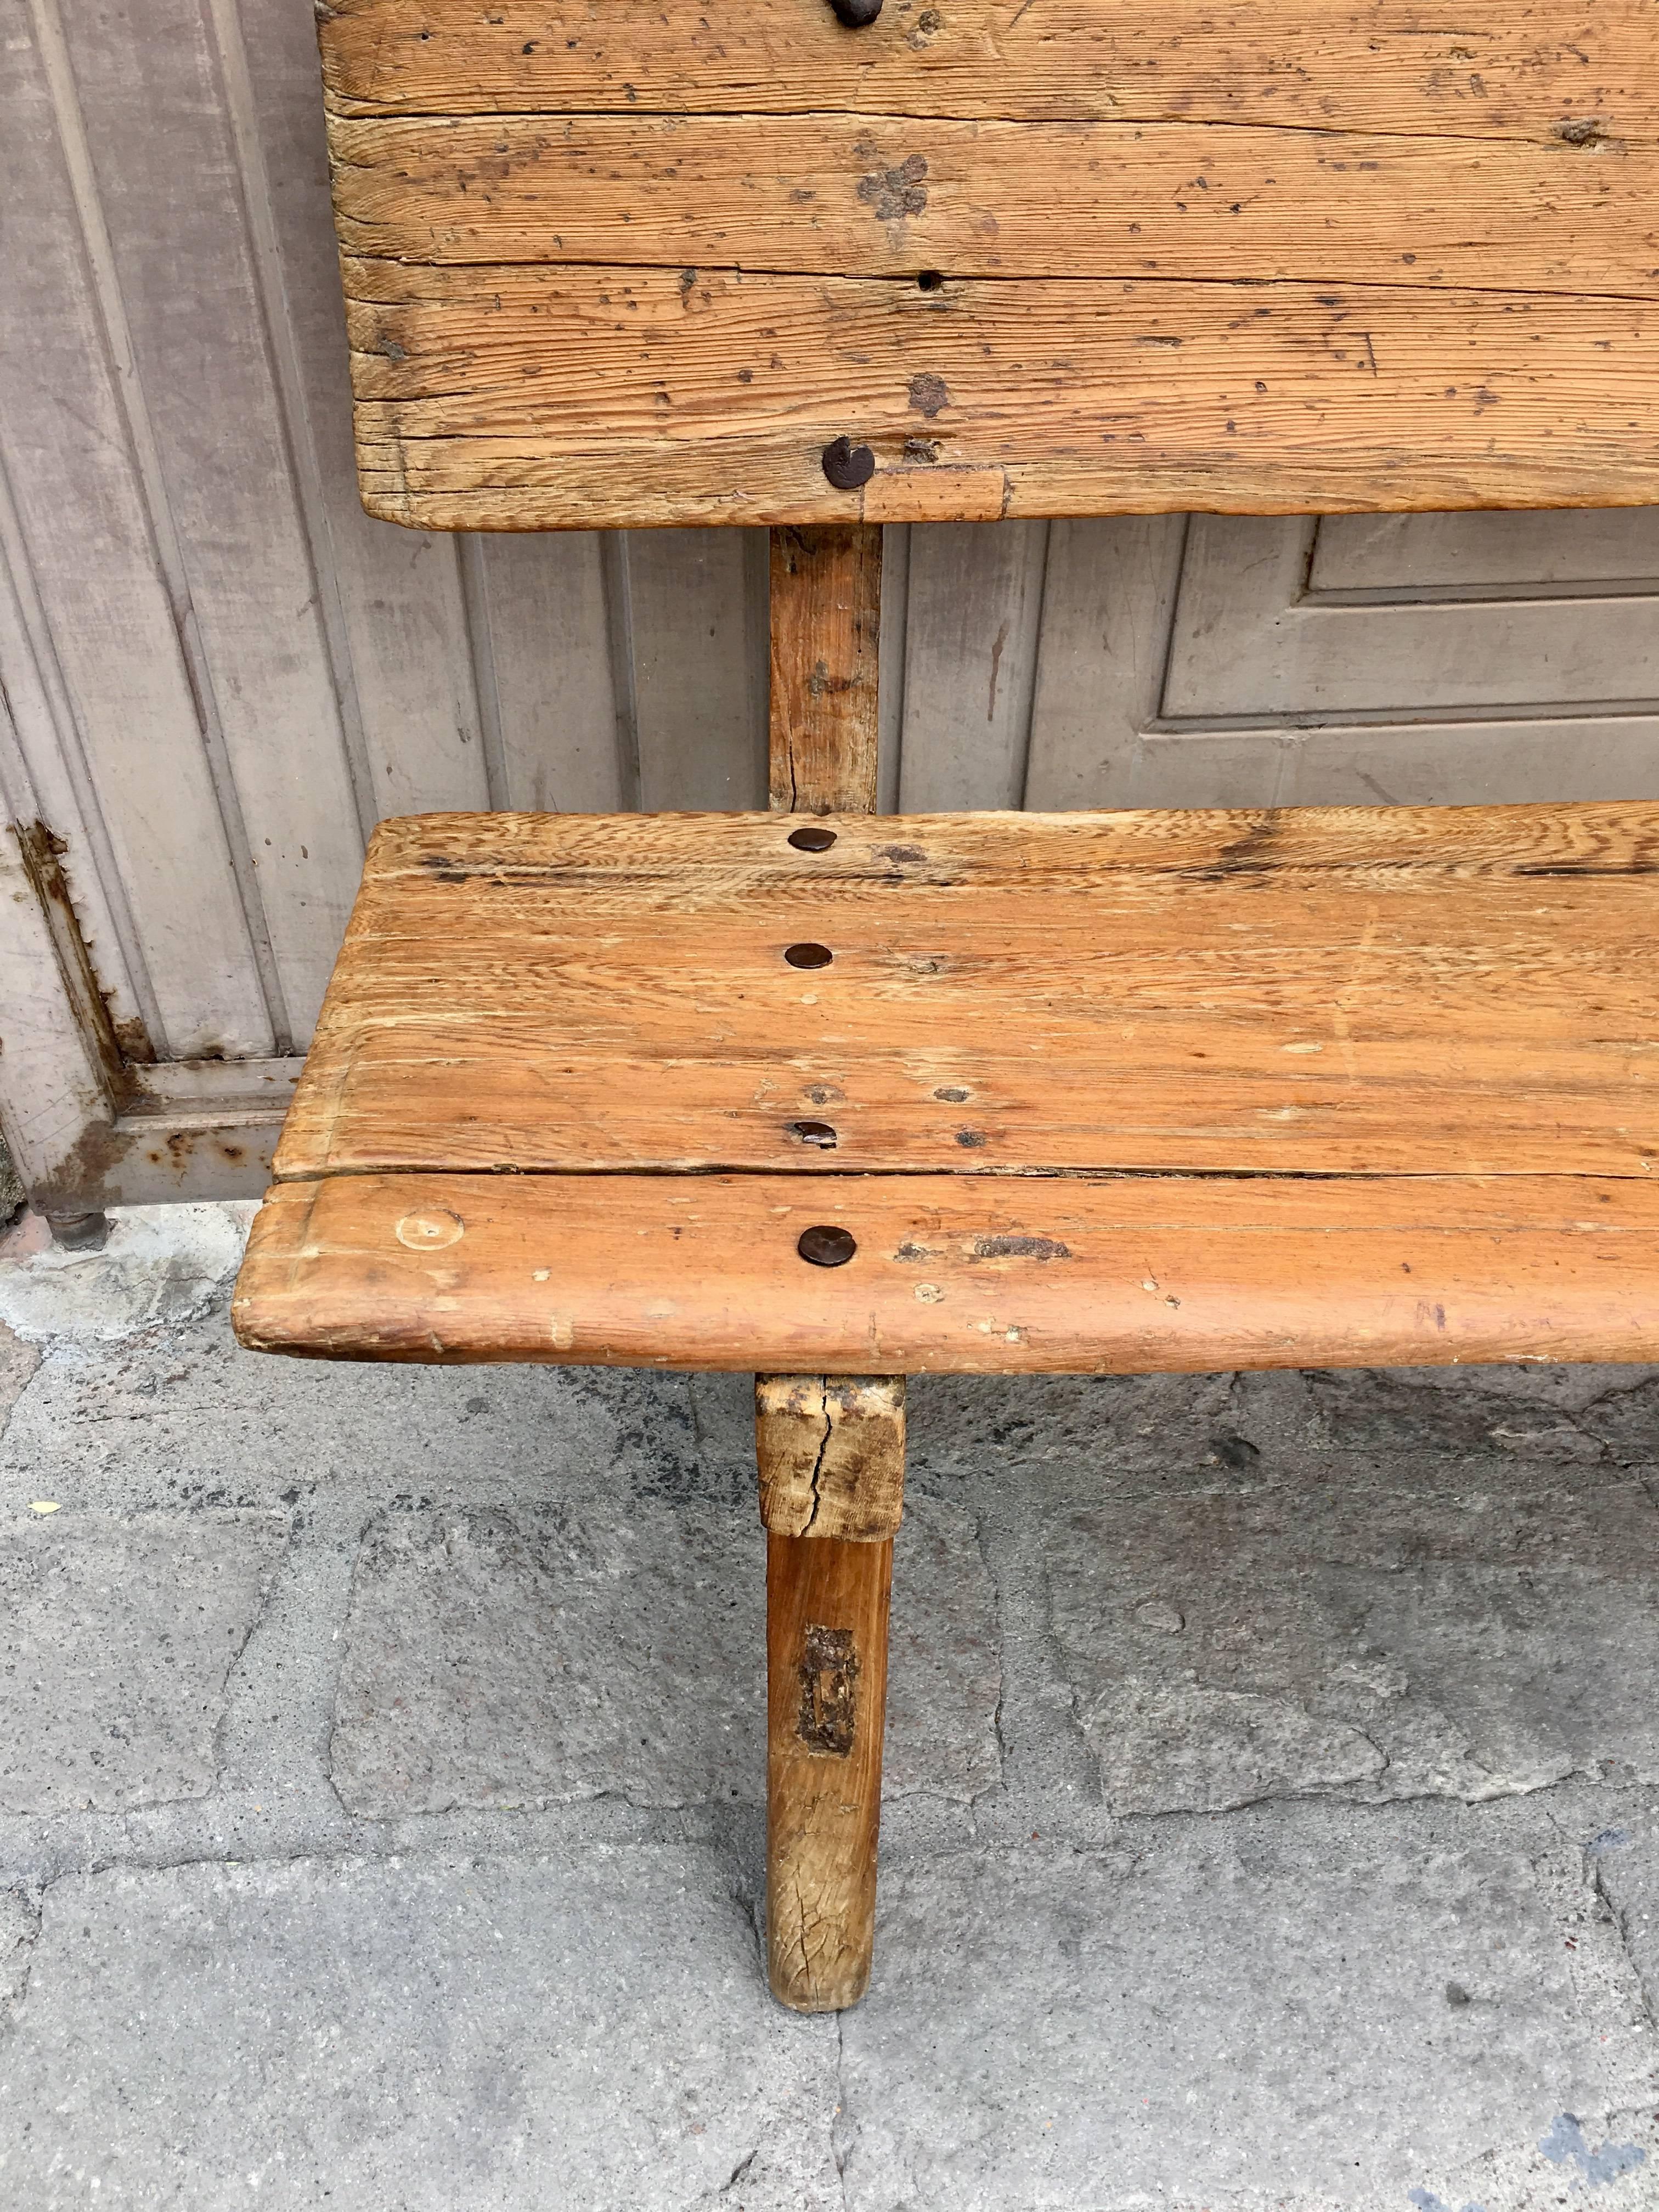 Colonial bench from Guanajuato, Mexico. Composed of local Bald Cypress wood using hand-forged iron nails. This rare bench is originally from an hacienda in the outskirts of San Miguel de Allende. The piece is structurally solid and all parts are